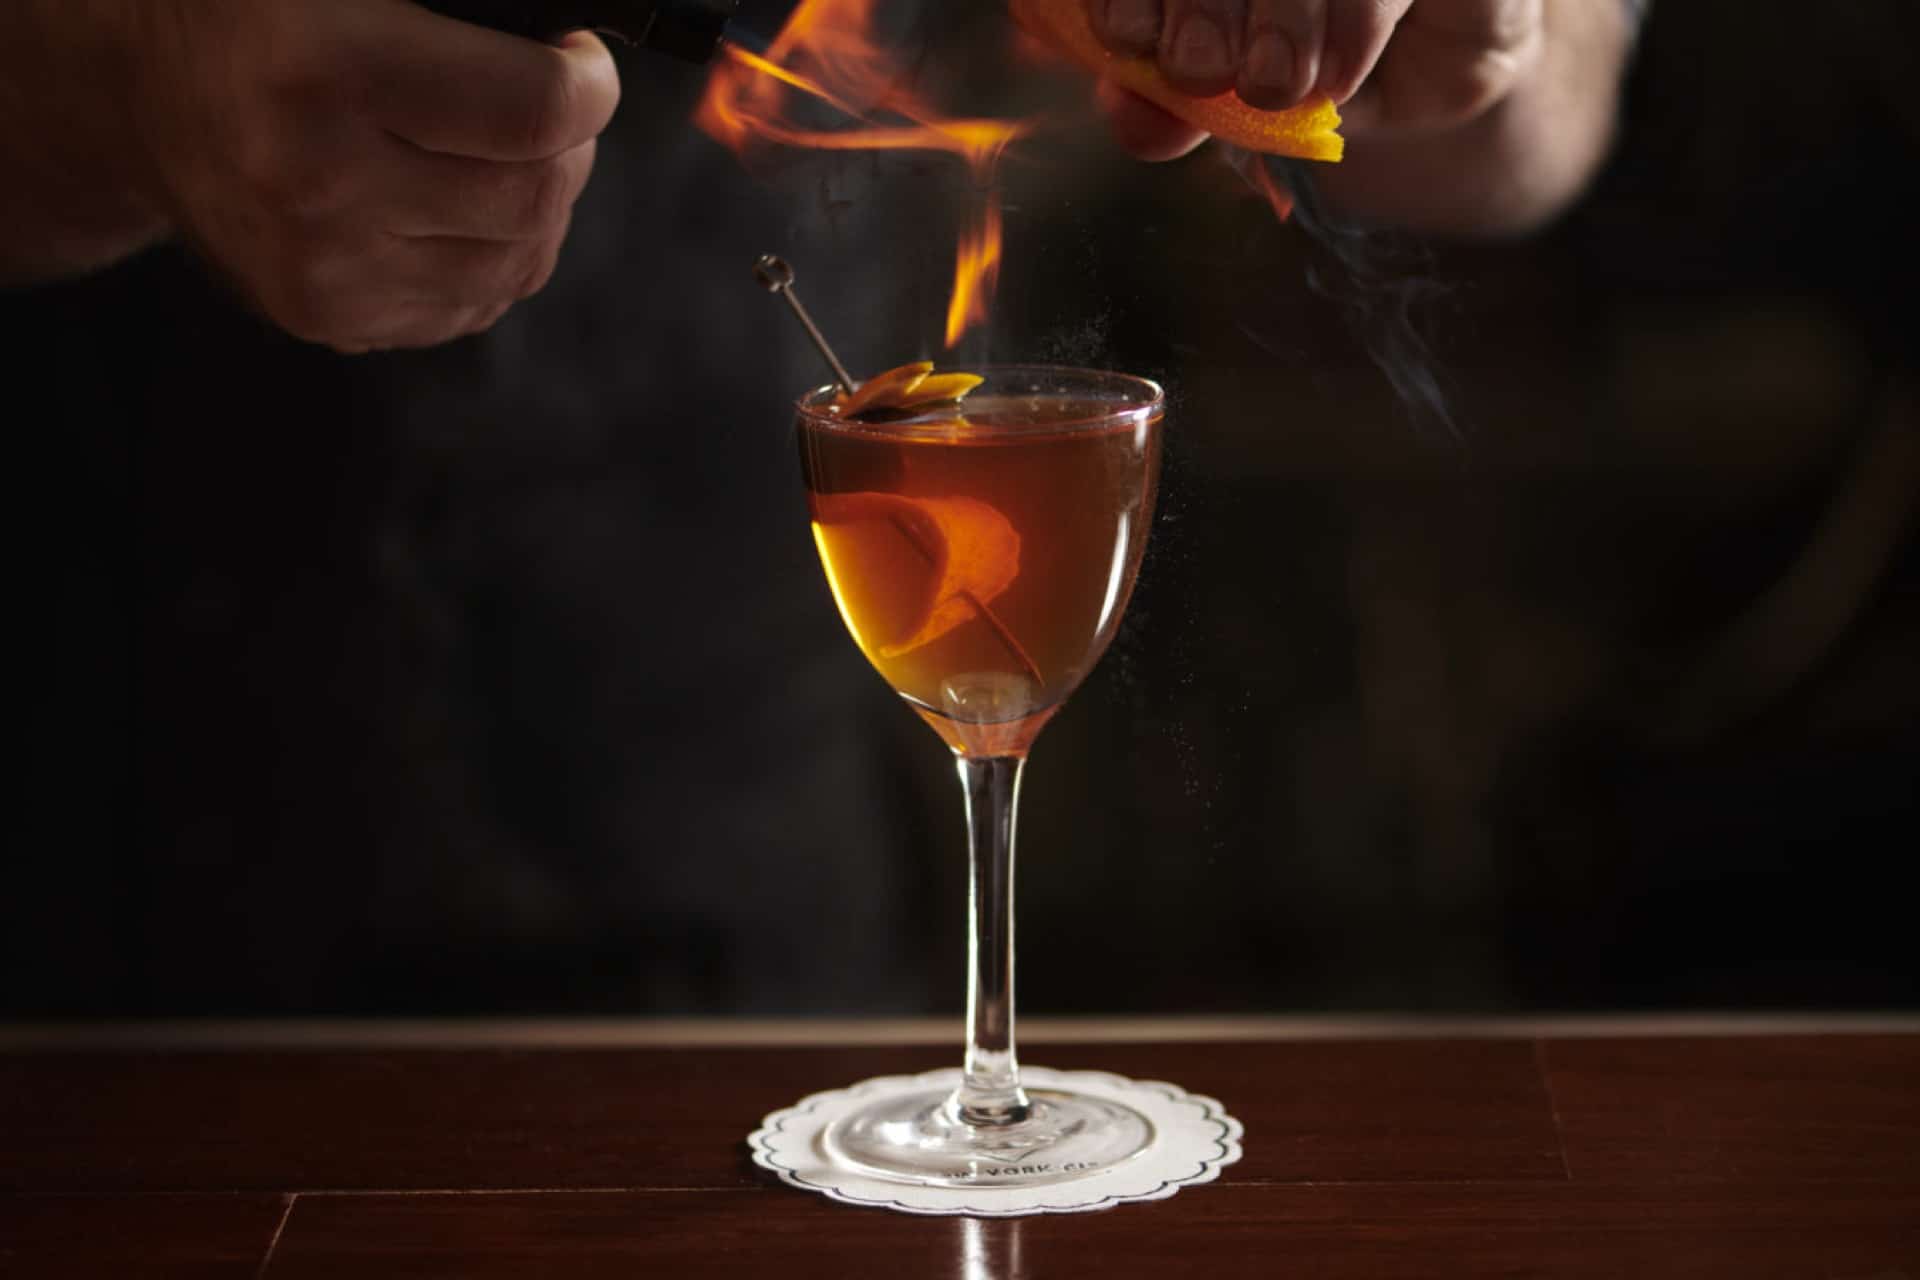 a bartender expressing the oils from an orange over a match above a cocktail